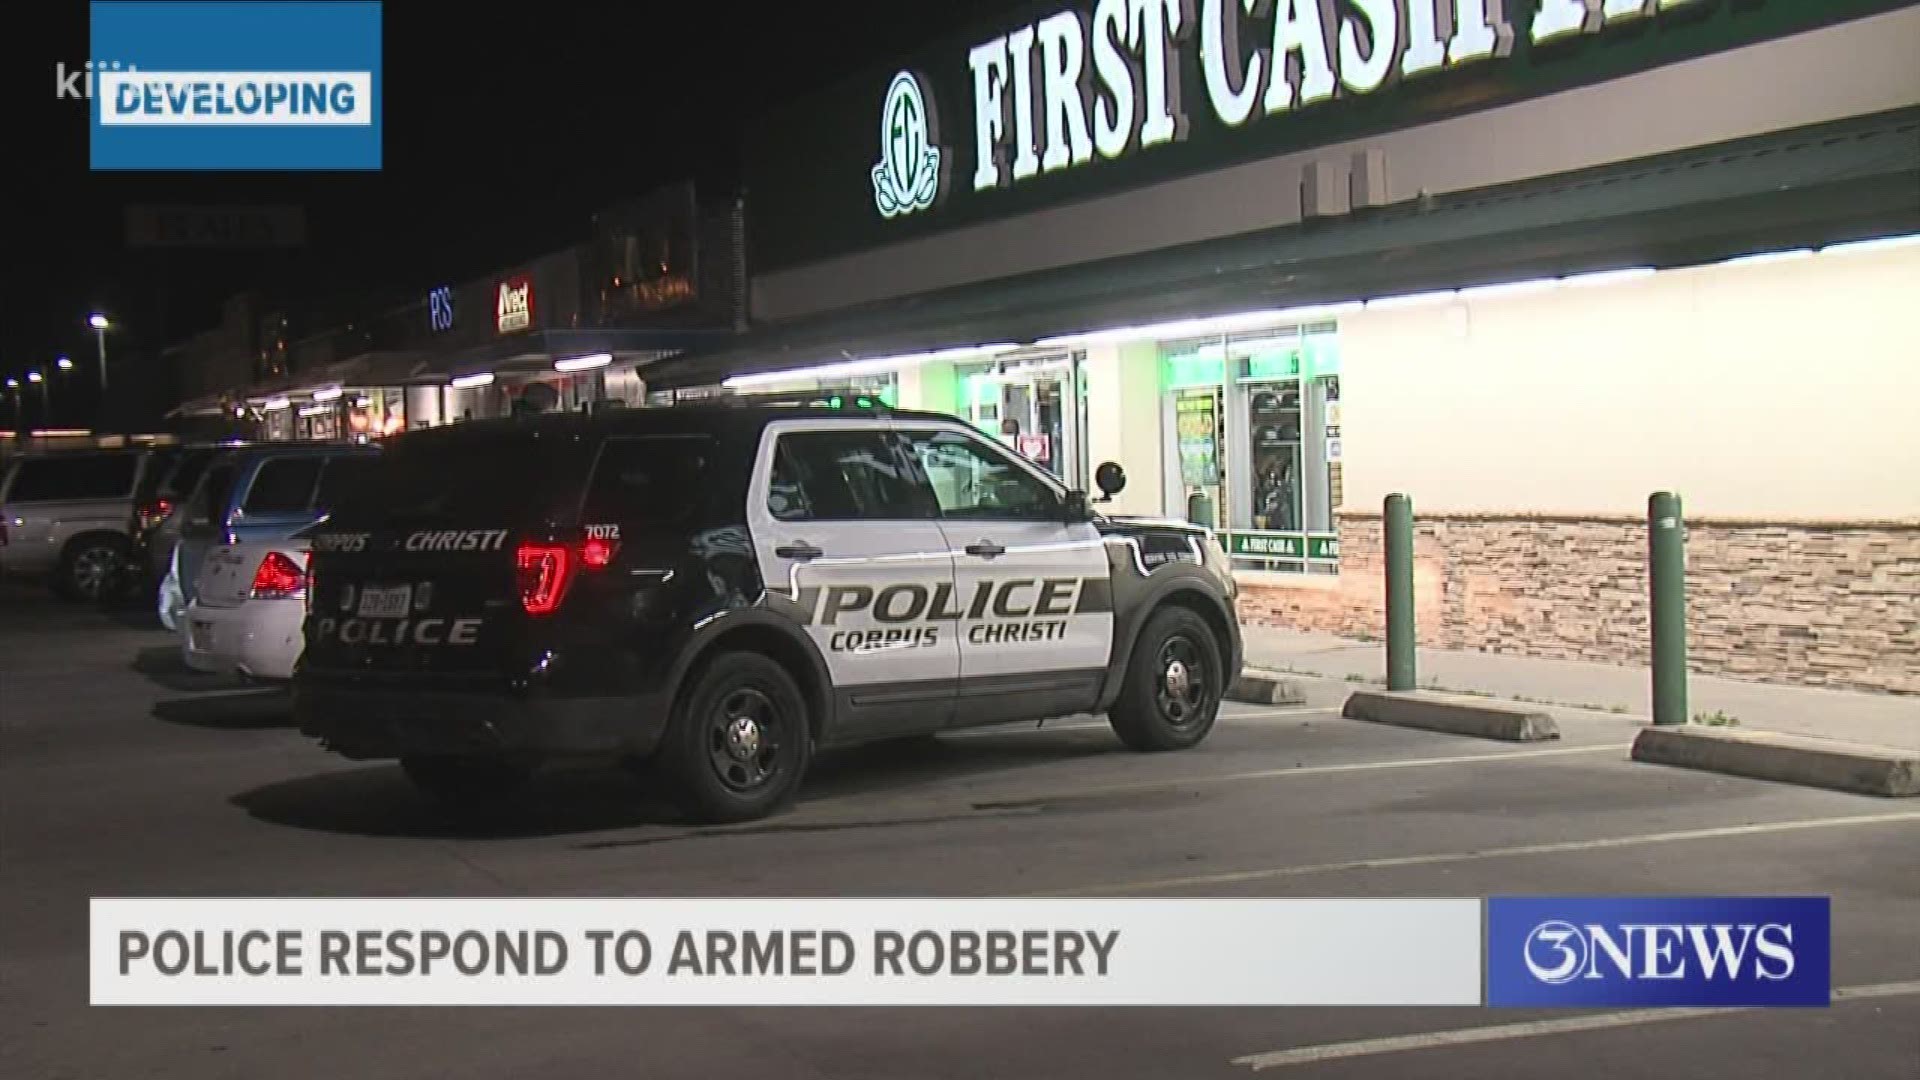 Officers were called out to the First Cash Pawn Shop on Ayers St. near Port Ave. where two suspects went into the business armed with guns.